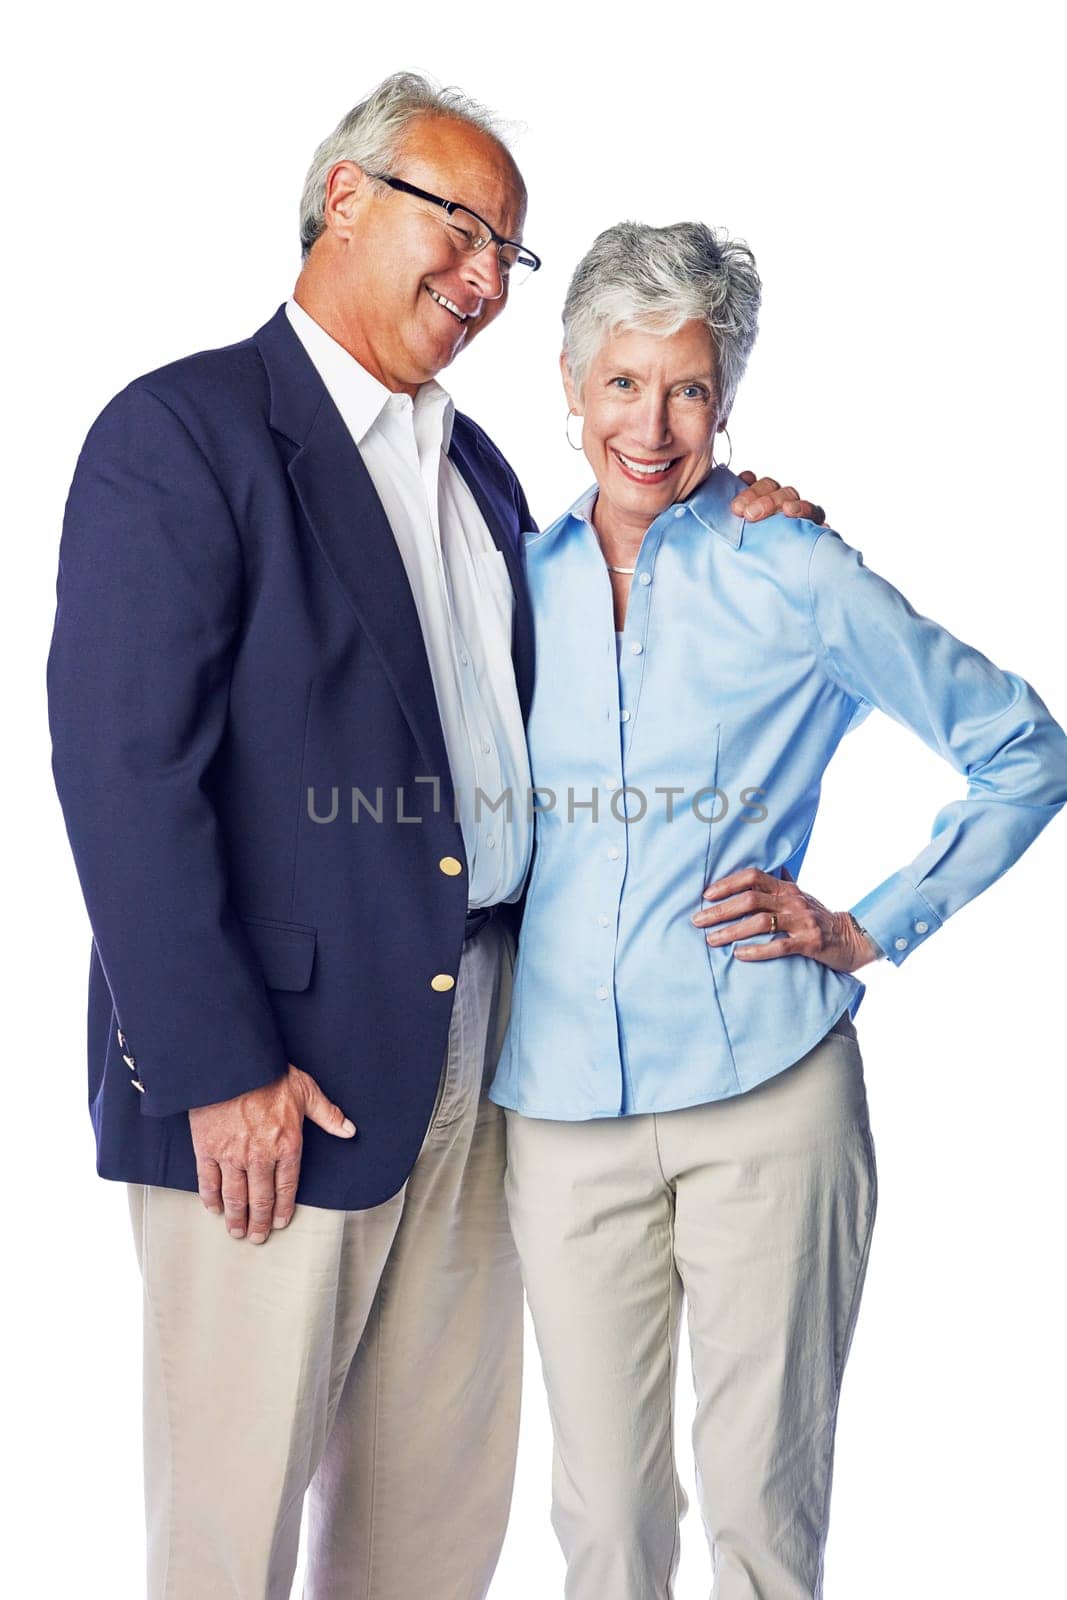 Love, smile and portrait of senior couple standing in studio, isolated on white background. Retirement, happy and healthy relationship, romance for elderly man with woman together in formal clothes